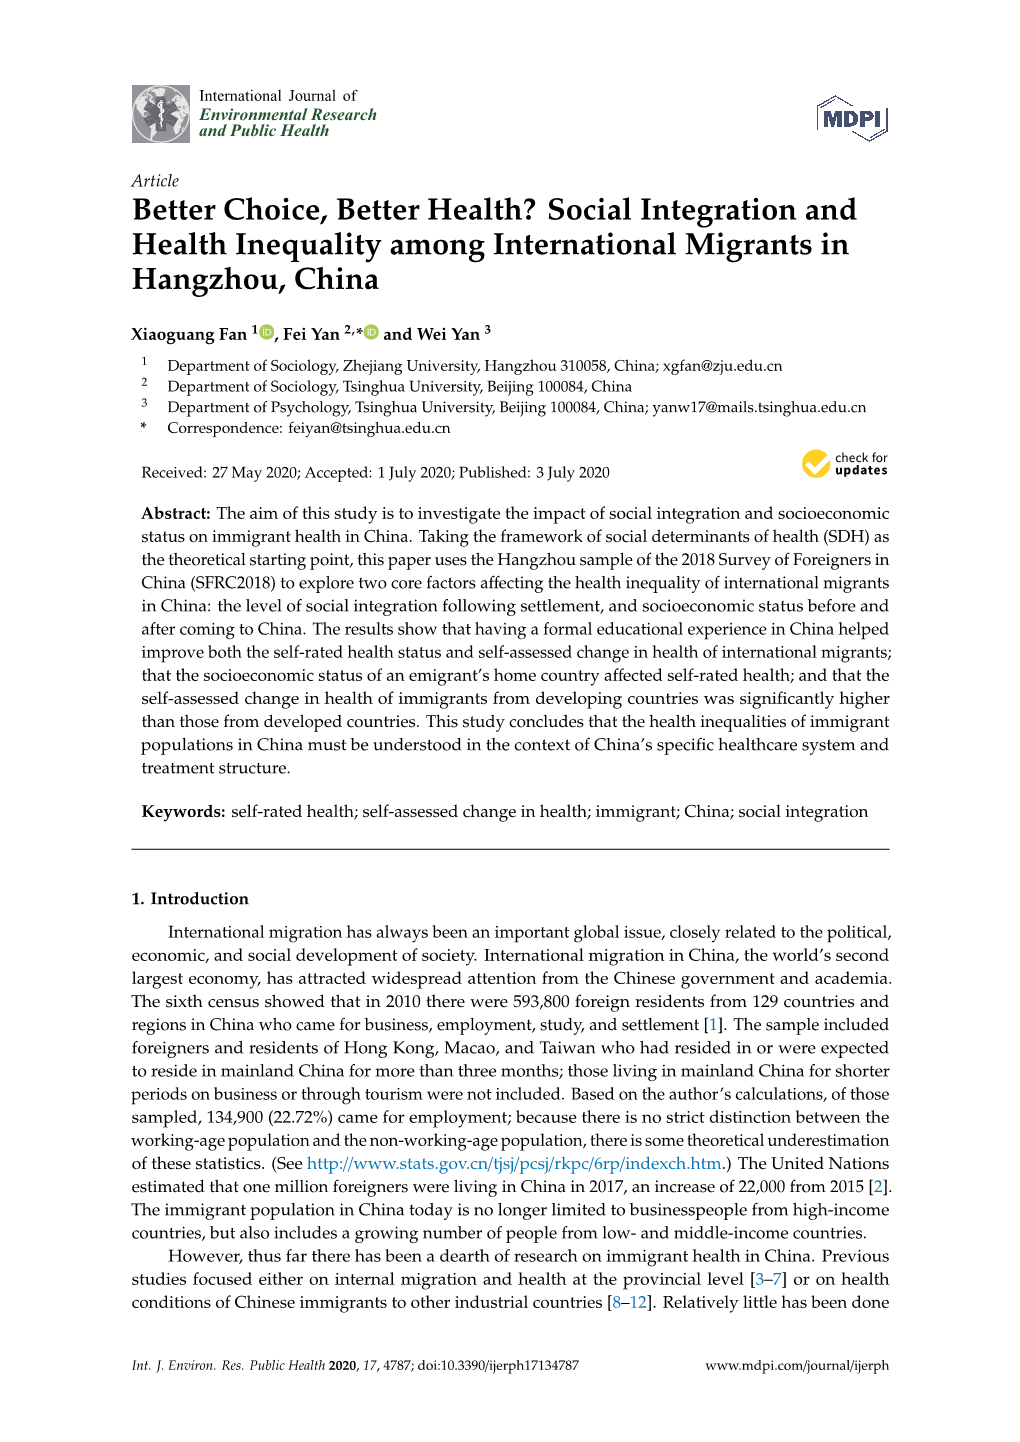 Social Integration and Health Inequality Among International Migrants in Hangzhou, China